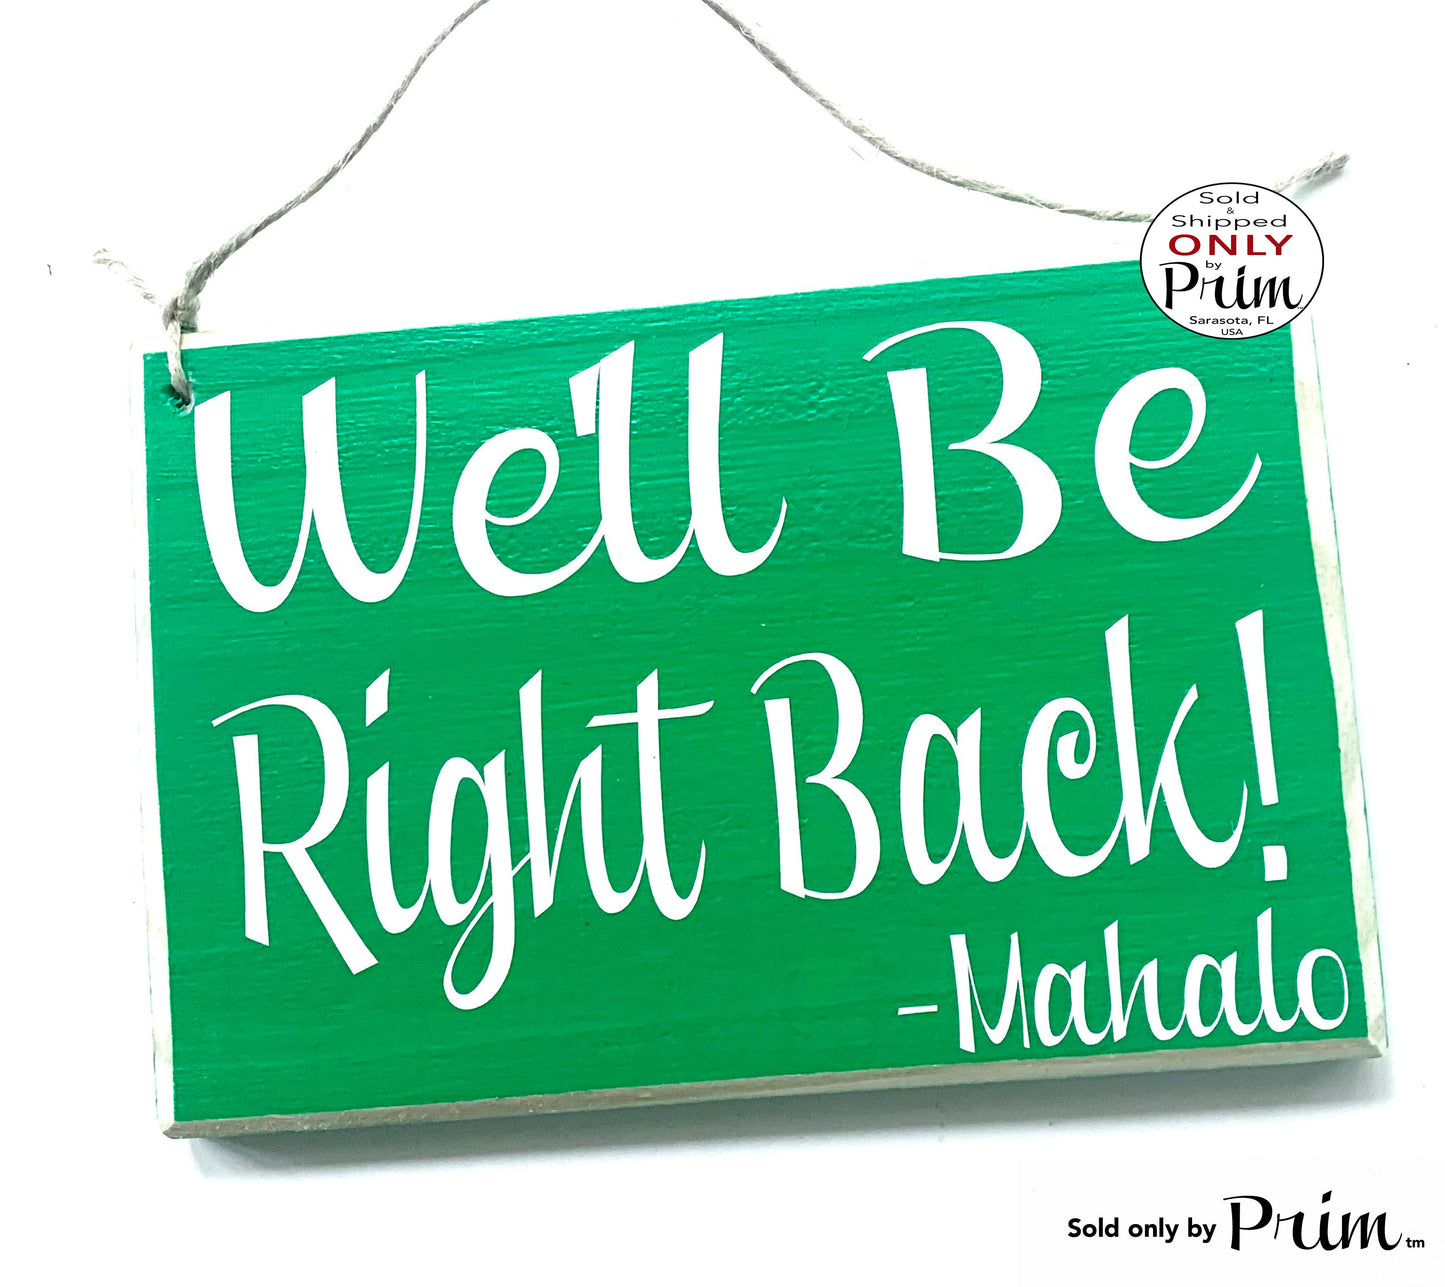 8x6 We'll Be Right Back Mahalo Custom Wood Be Back Shortly Closed Come Back Soon Please Wait Unavailable Office Business Door Hanger Plaque Designs by Prim